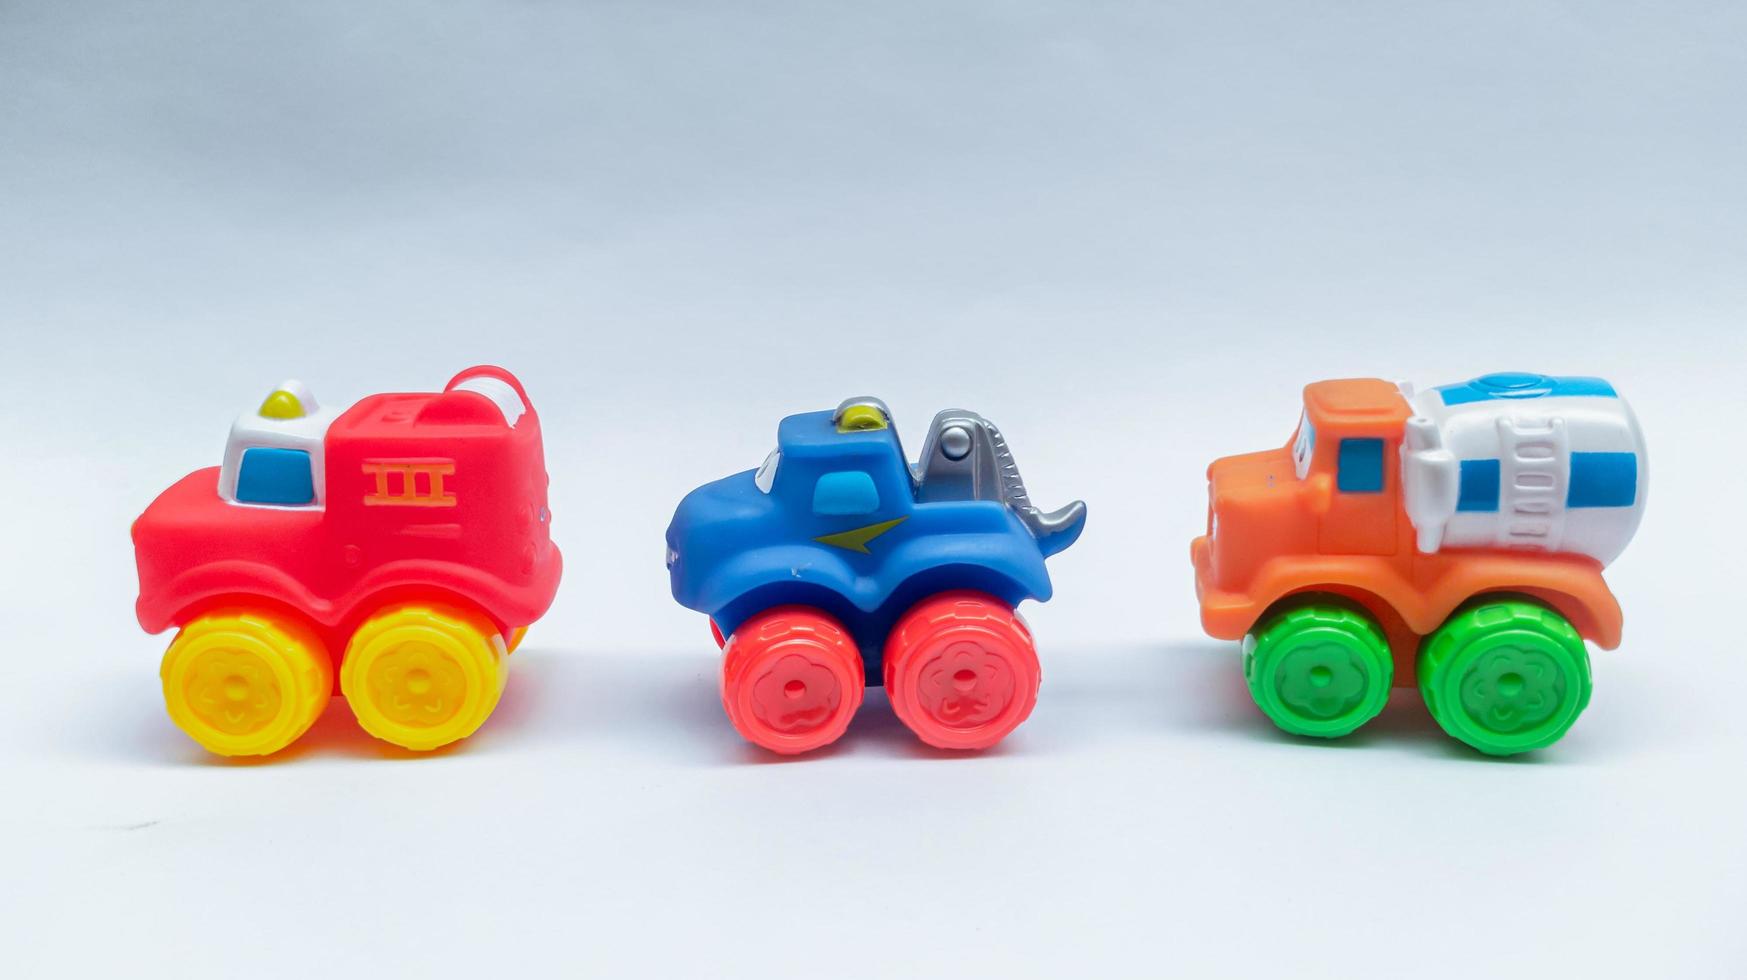 Children's toy colorful rubber toy isolated photo